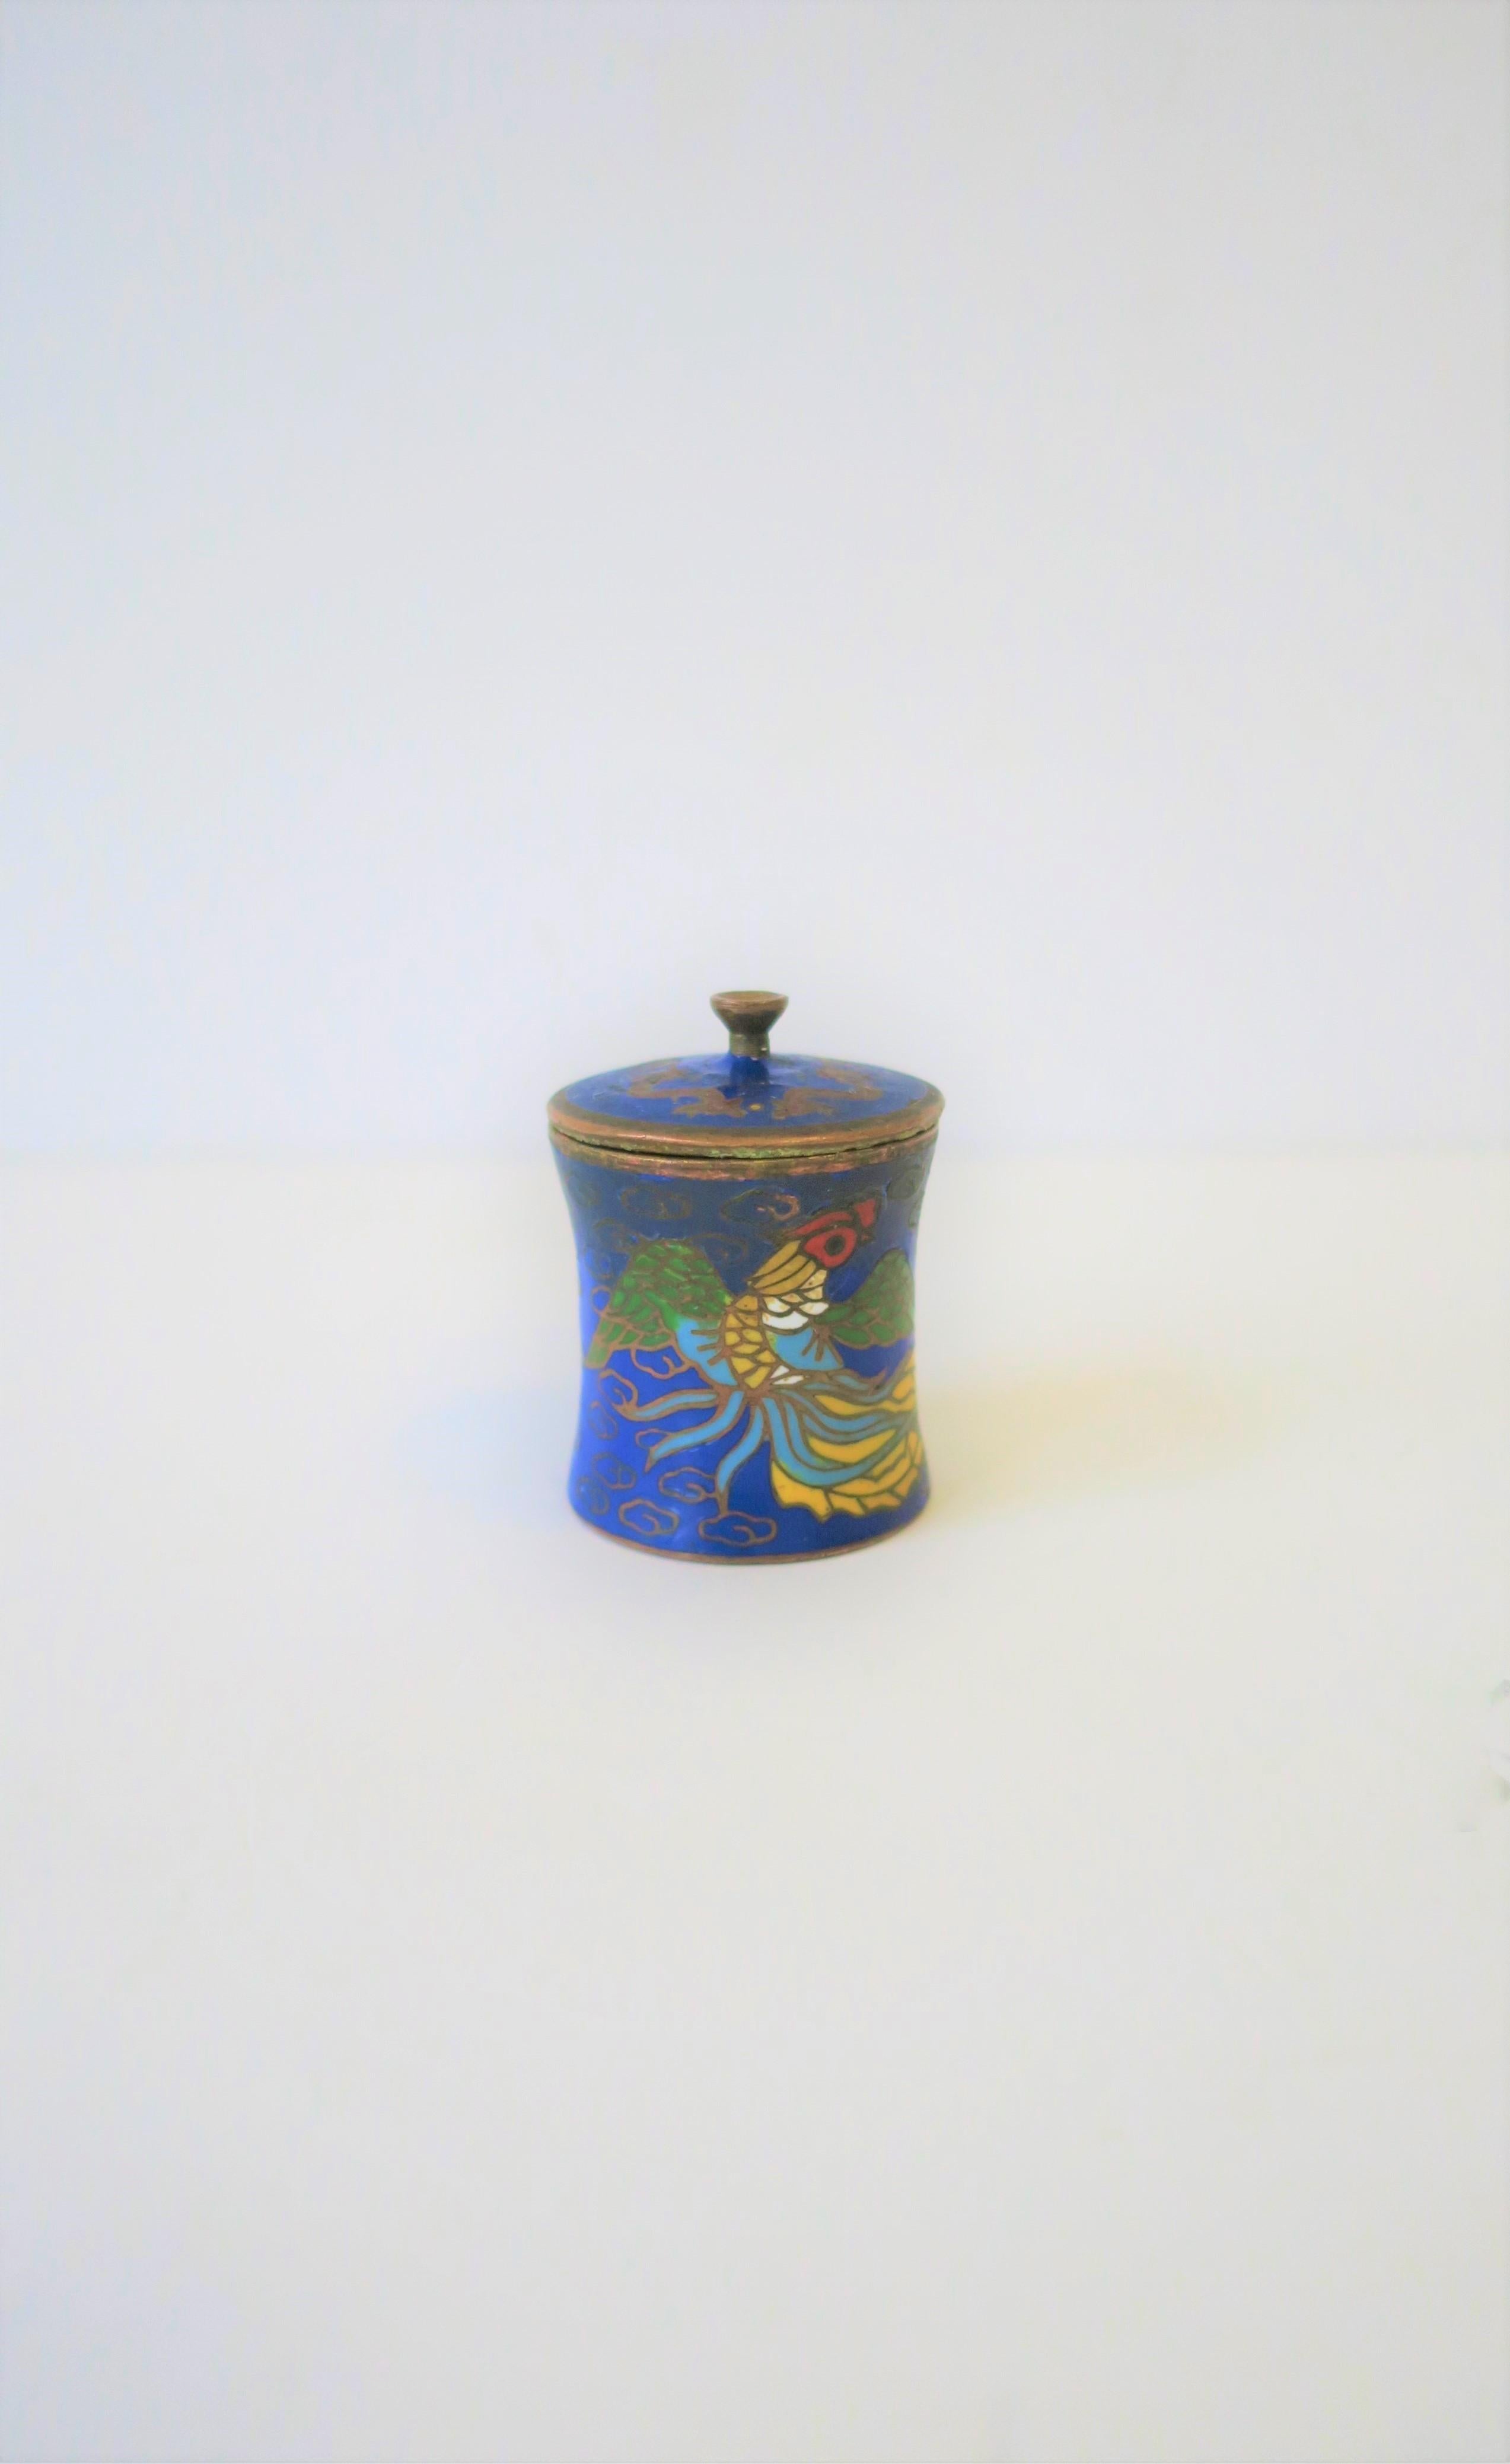 A beautiful, small, detailed round Chinese Cloisonné enamel and brass box with lid, circa mid to early 20th century China. This is a great petite box with a beautiful 'squid' sea creature exterior design that wraps around; box is predominantly blue